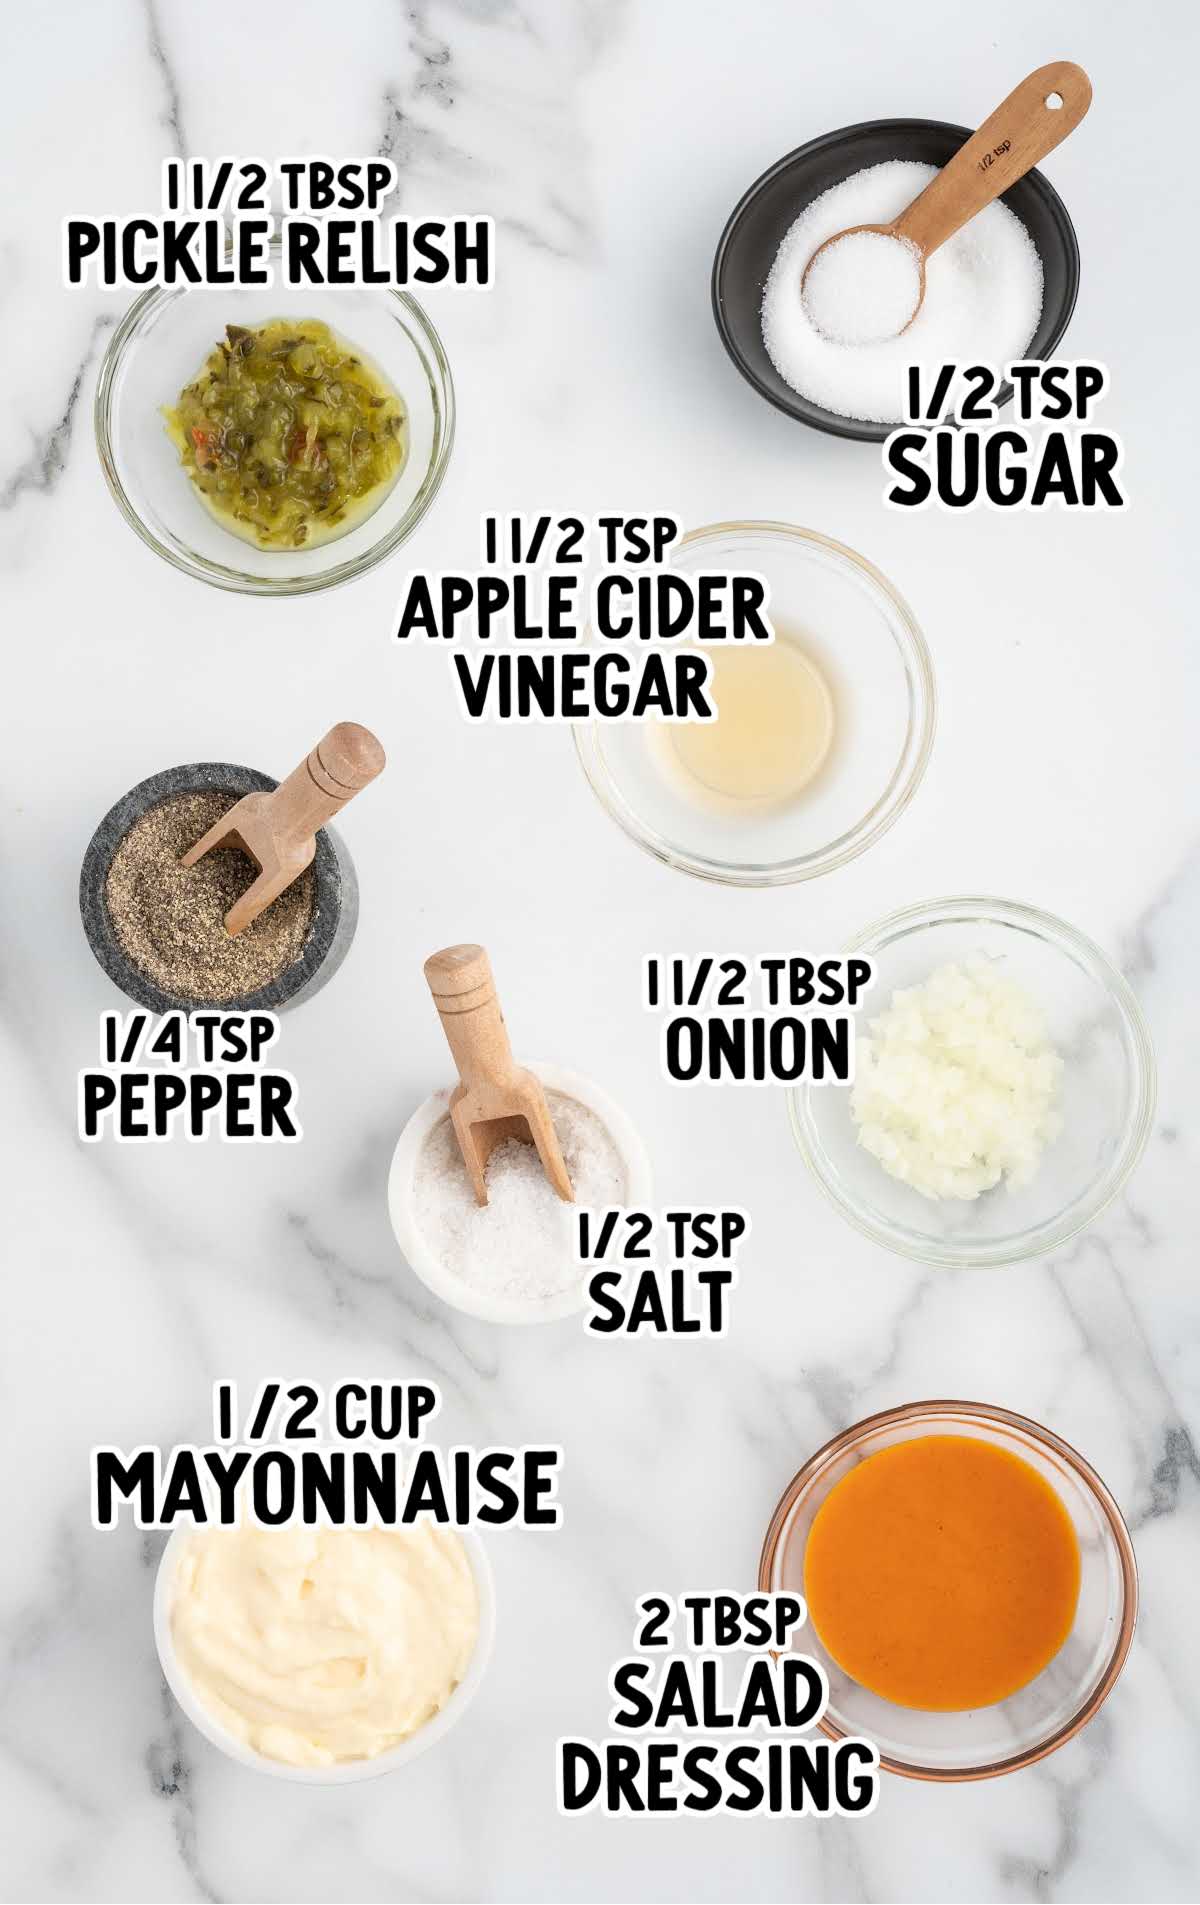 Big Mac Sauce Recipe raw ingredients that are labeled